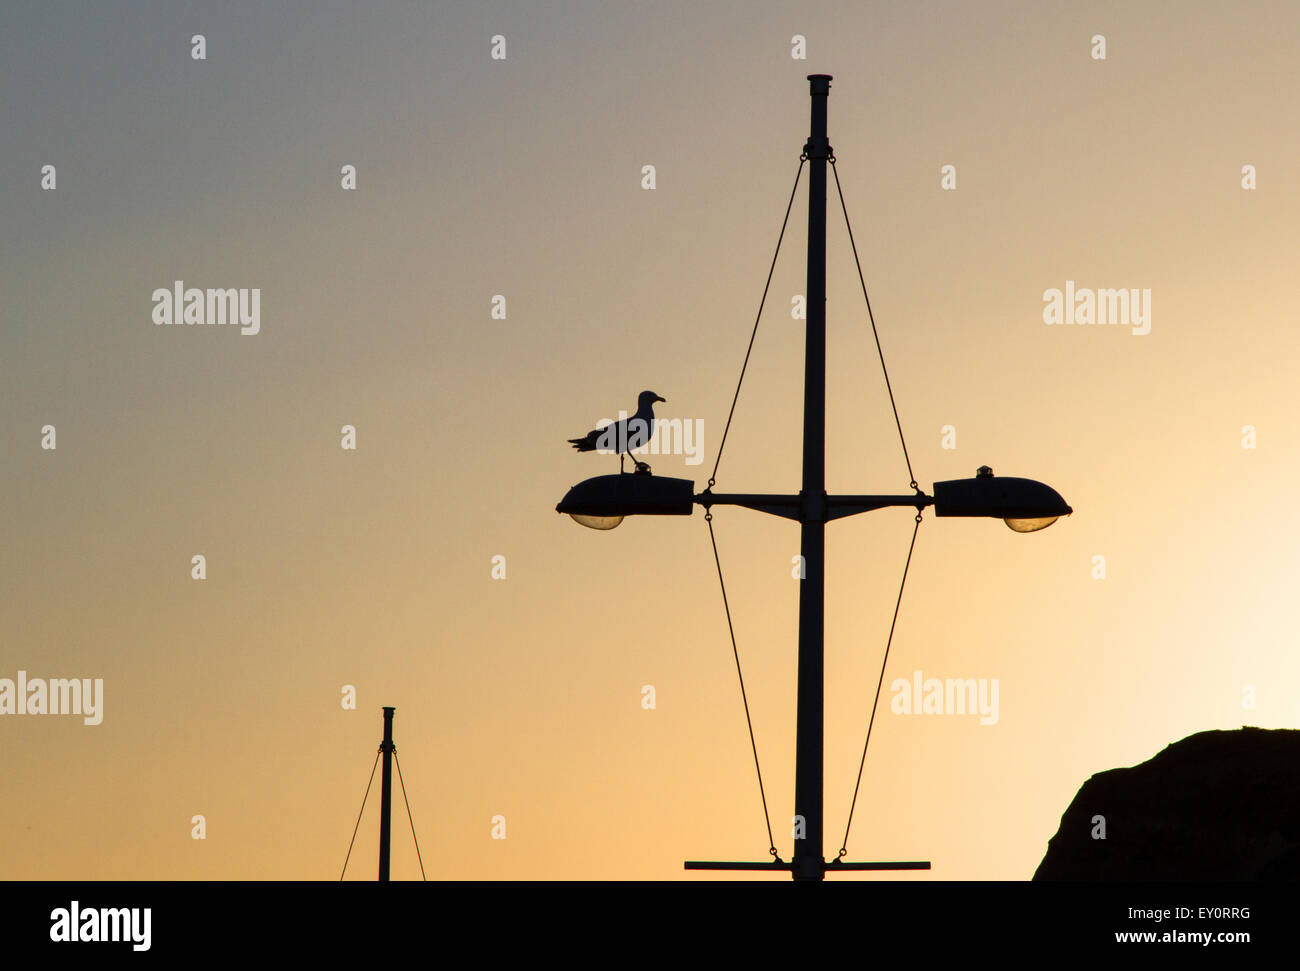 A seagull perched on a streetlight in the setting sun on the Dorset coastline England Uk Stock Photo